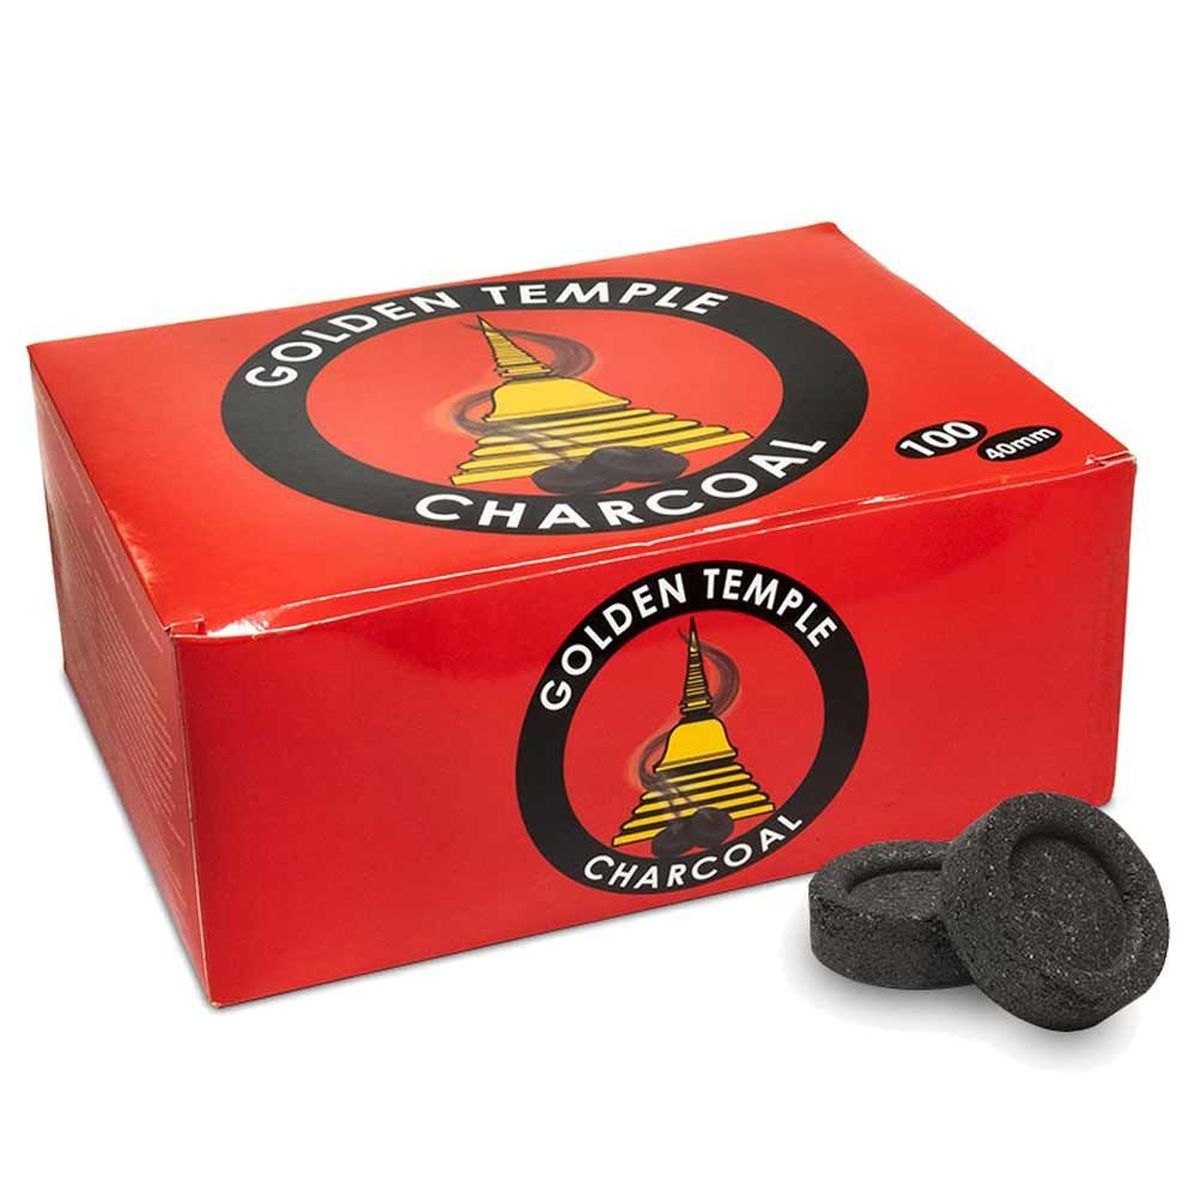 Charcoal Tablets Golden Temple - 100 tablets - 40 mm